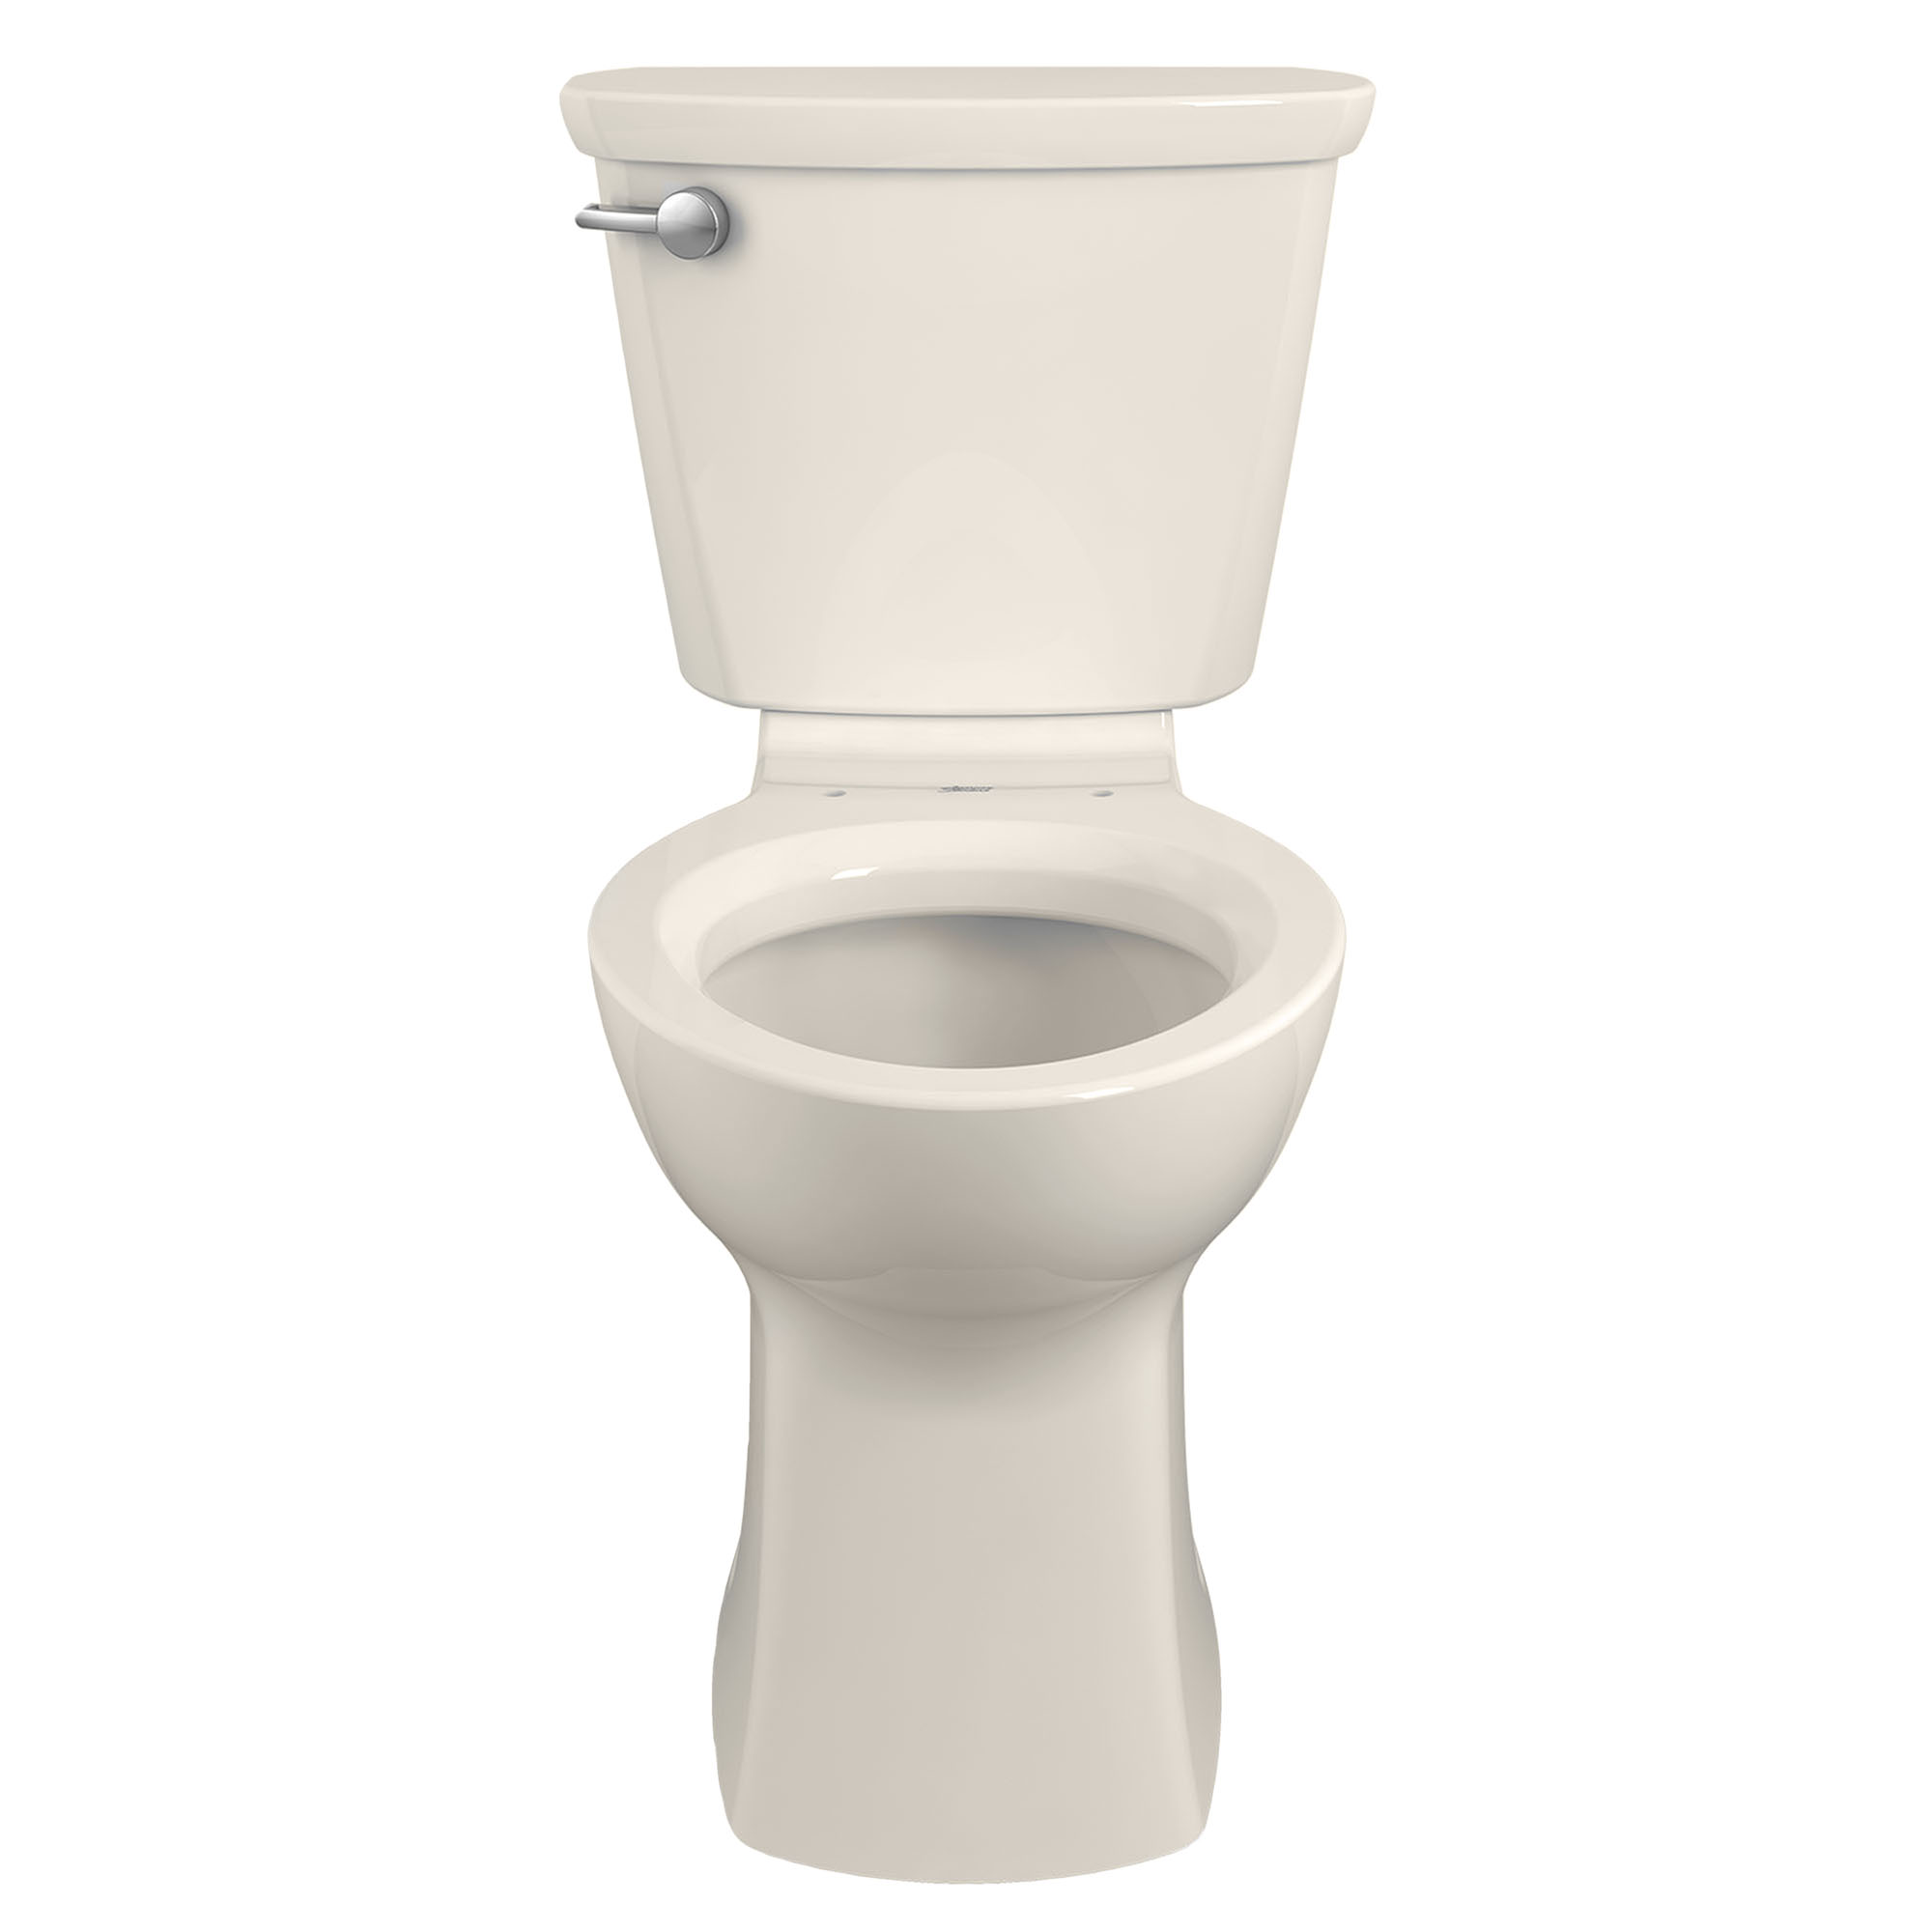 Cadet® PRO Two-Piece 1.6 gpf/6.0 Lpf  Standard Height Elongated 10-Inch Rough Toilet Less Seat